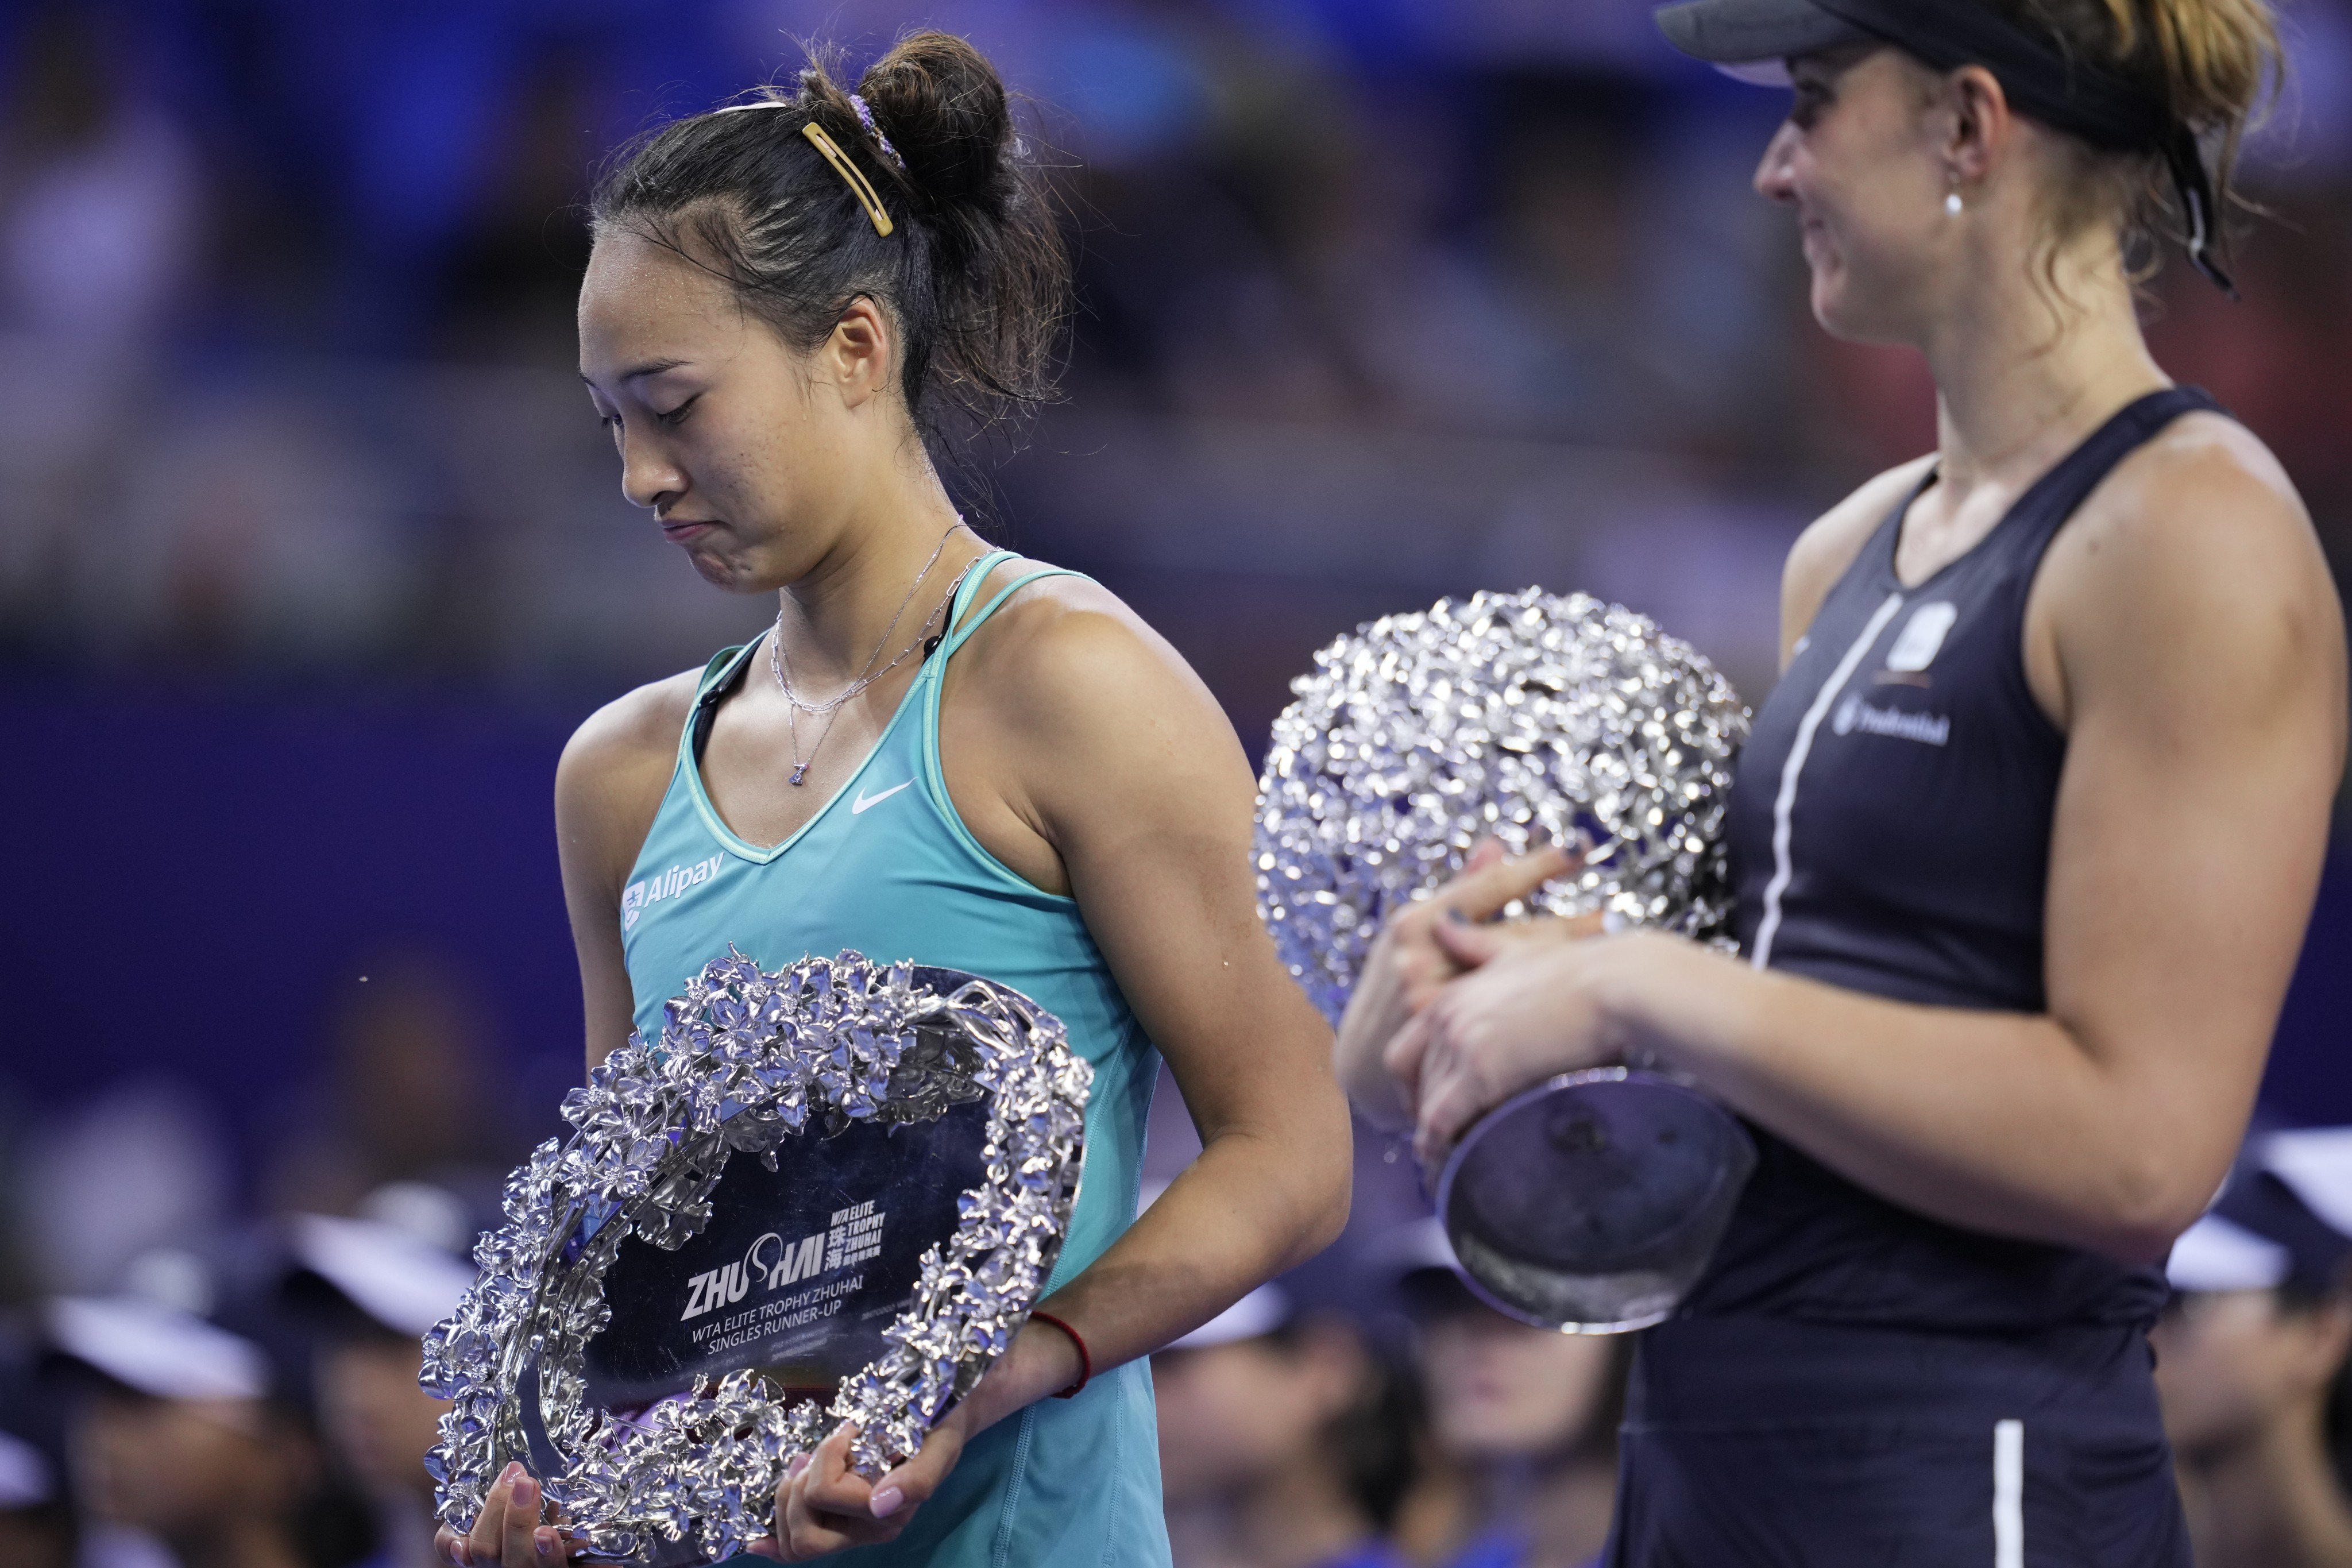 China’s Zheng Qinwen with her runner’s-up trophy after the WTA Elite Trophy singles final in Zhuhai. Photo: Getty Images